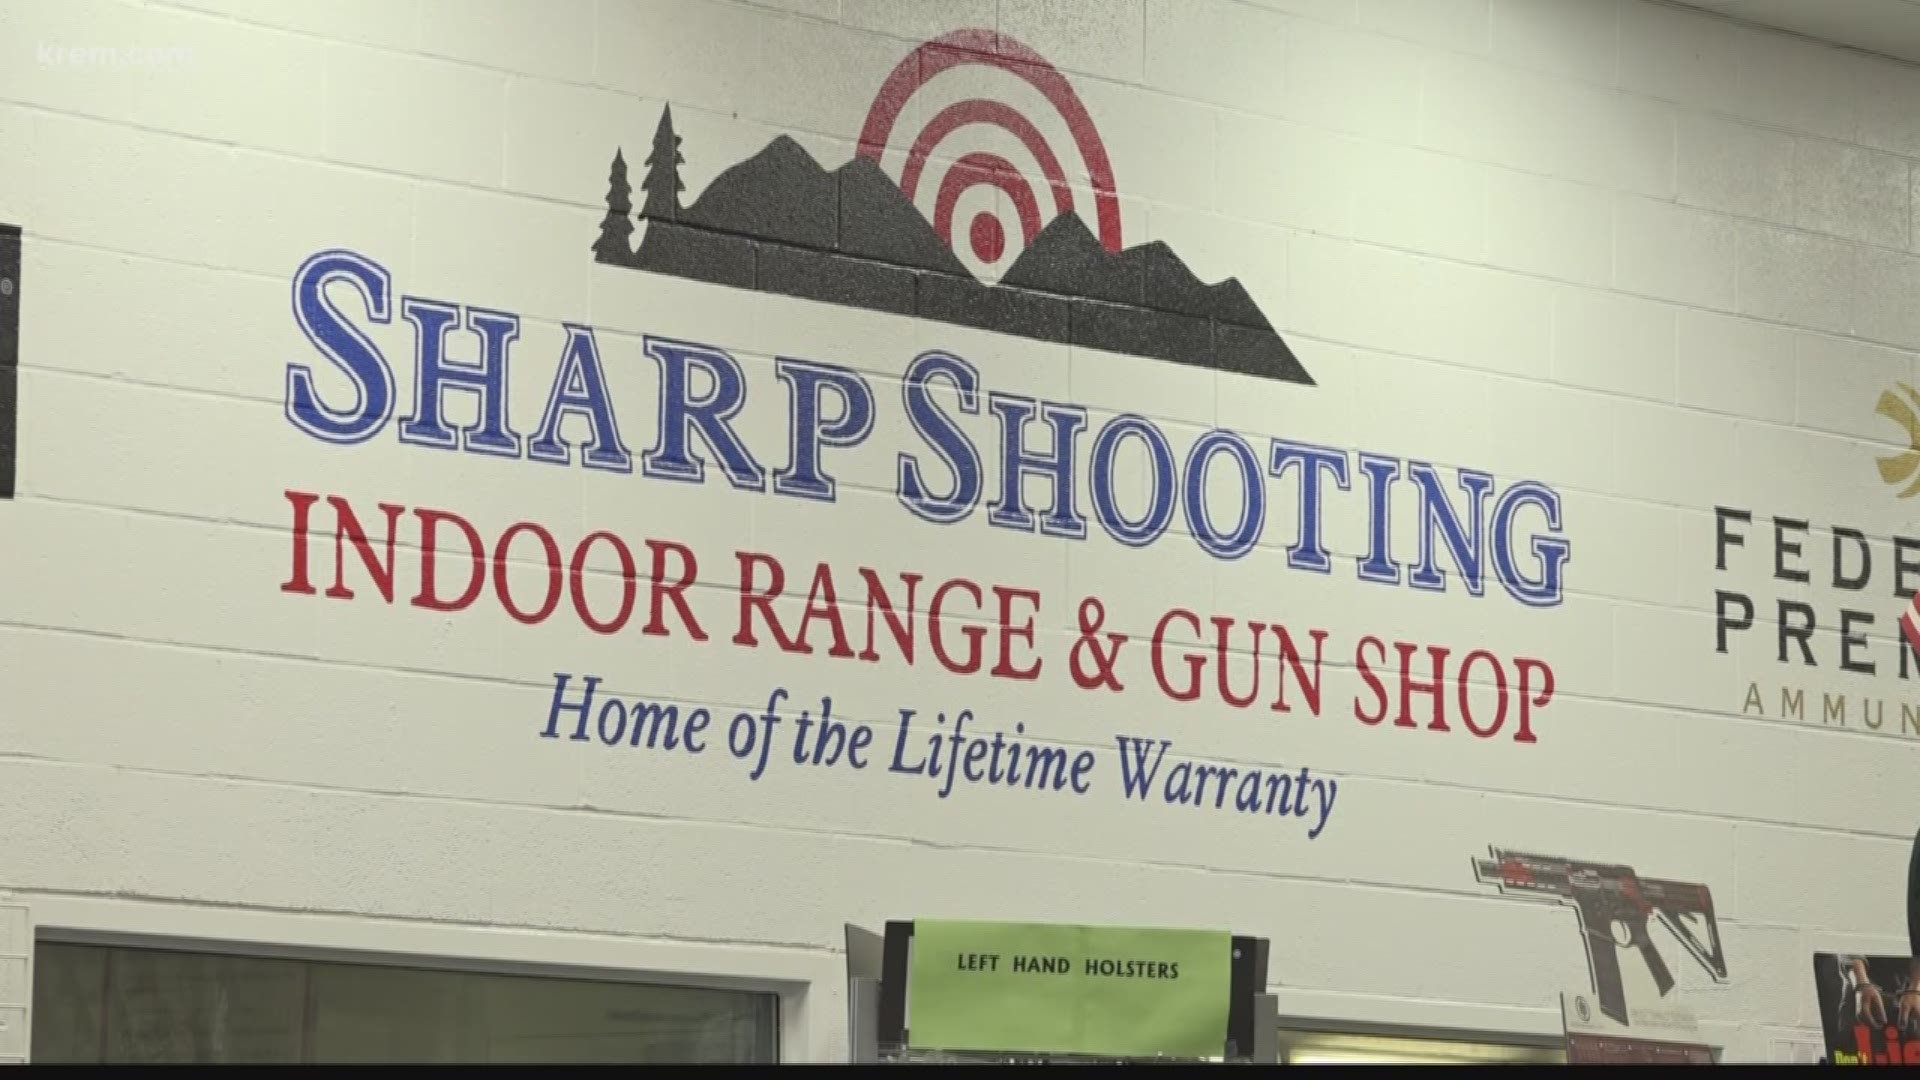 KREM's Amanda Roley spoke with a manager at Sharp Shooting Indoor Range and Gun Shop about their lawsuit against Washington state over I-1639.